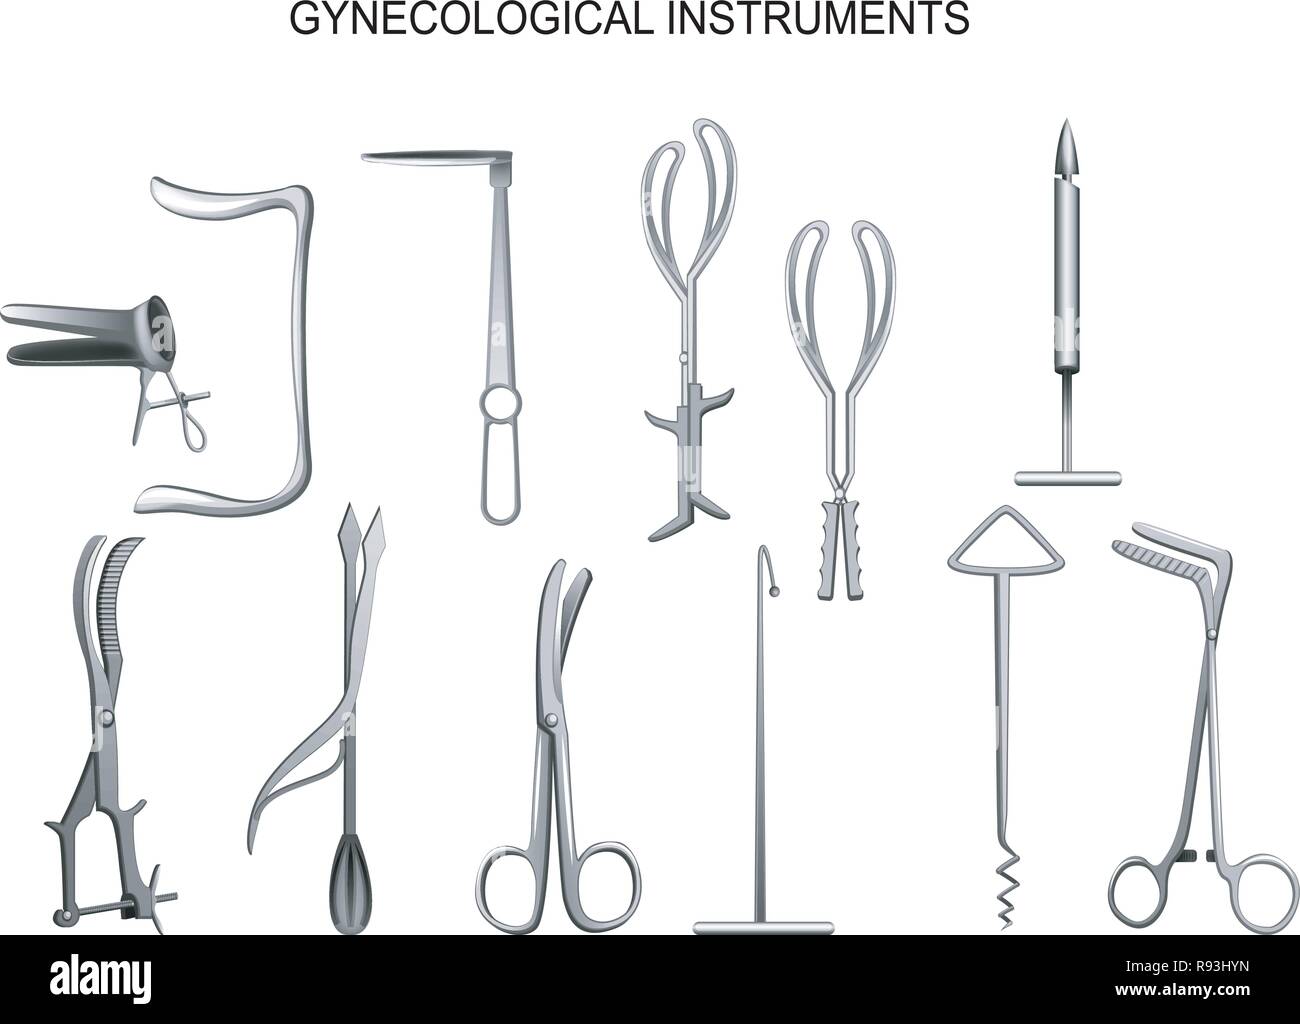 vector illustration of set of gynecologic and obstetric instruments Stock Vector